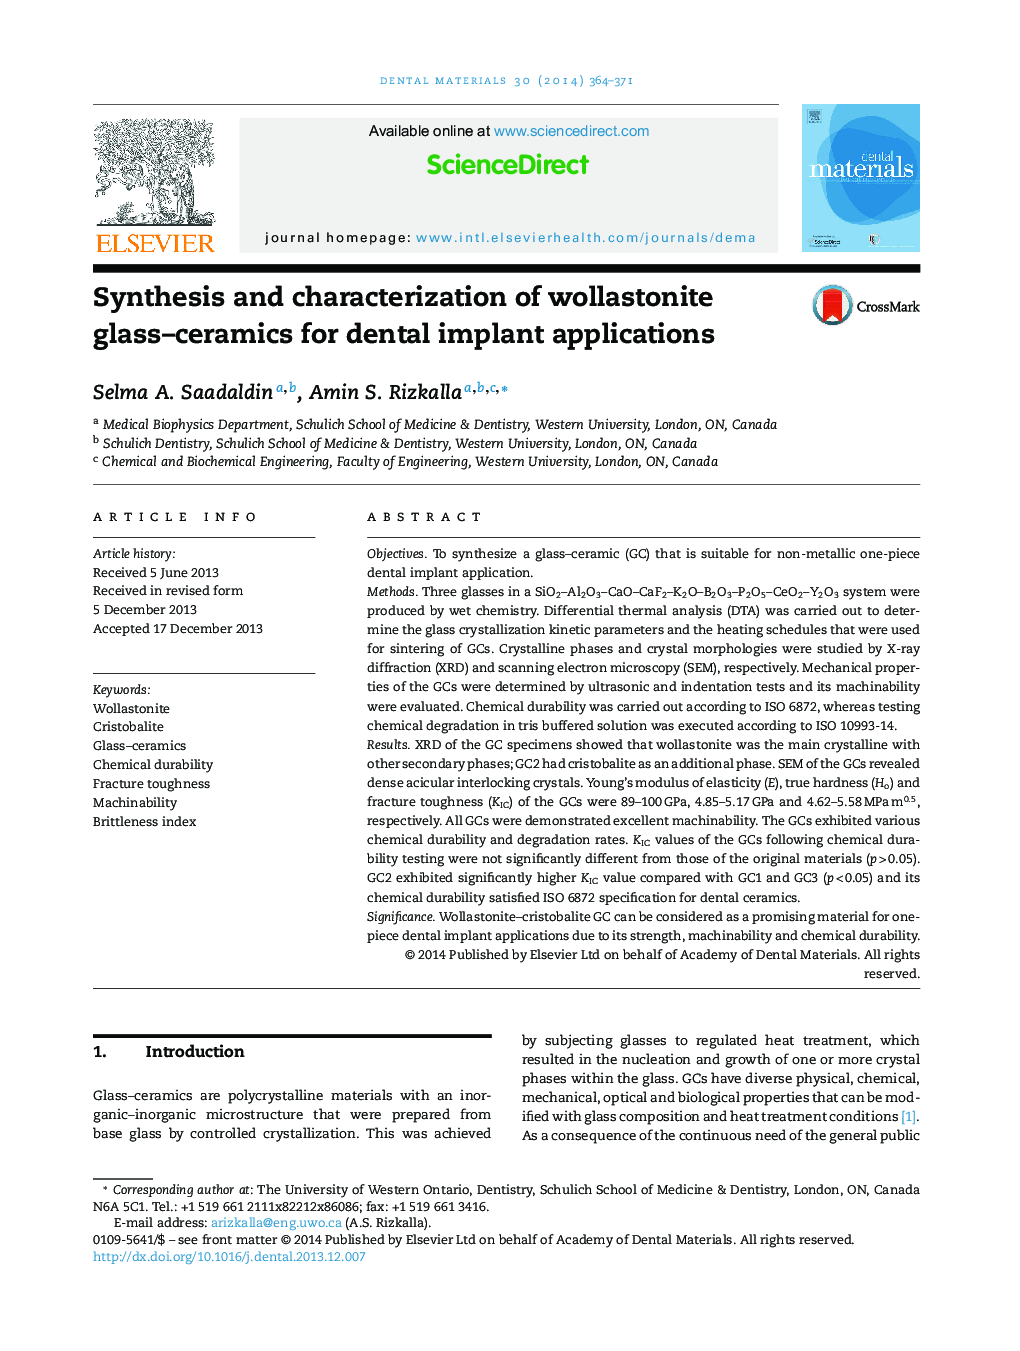 Synthesis and characterization of wollastonite glass–ceramics for dental implant applications